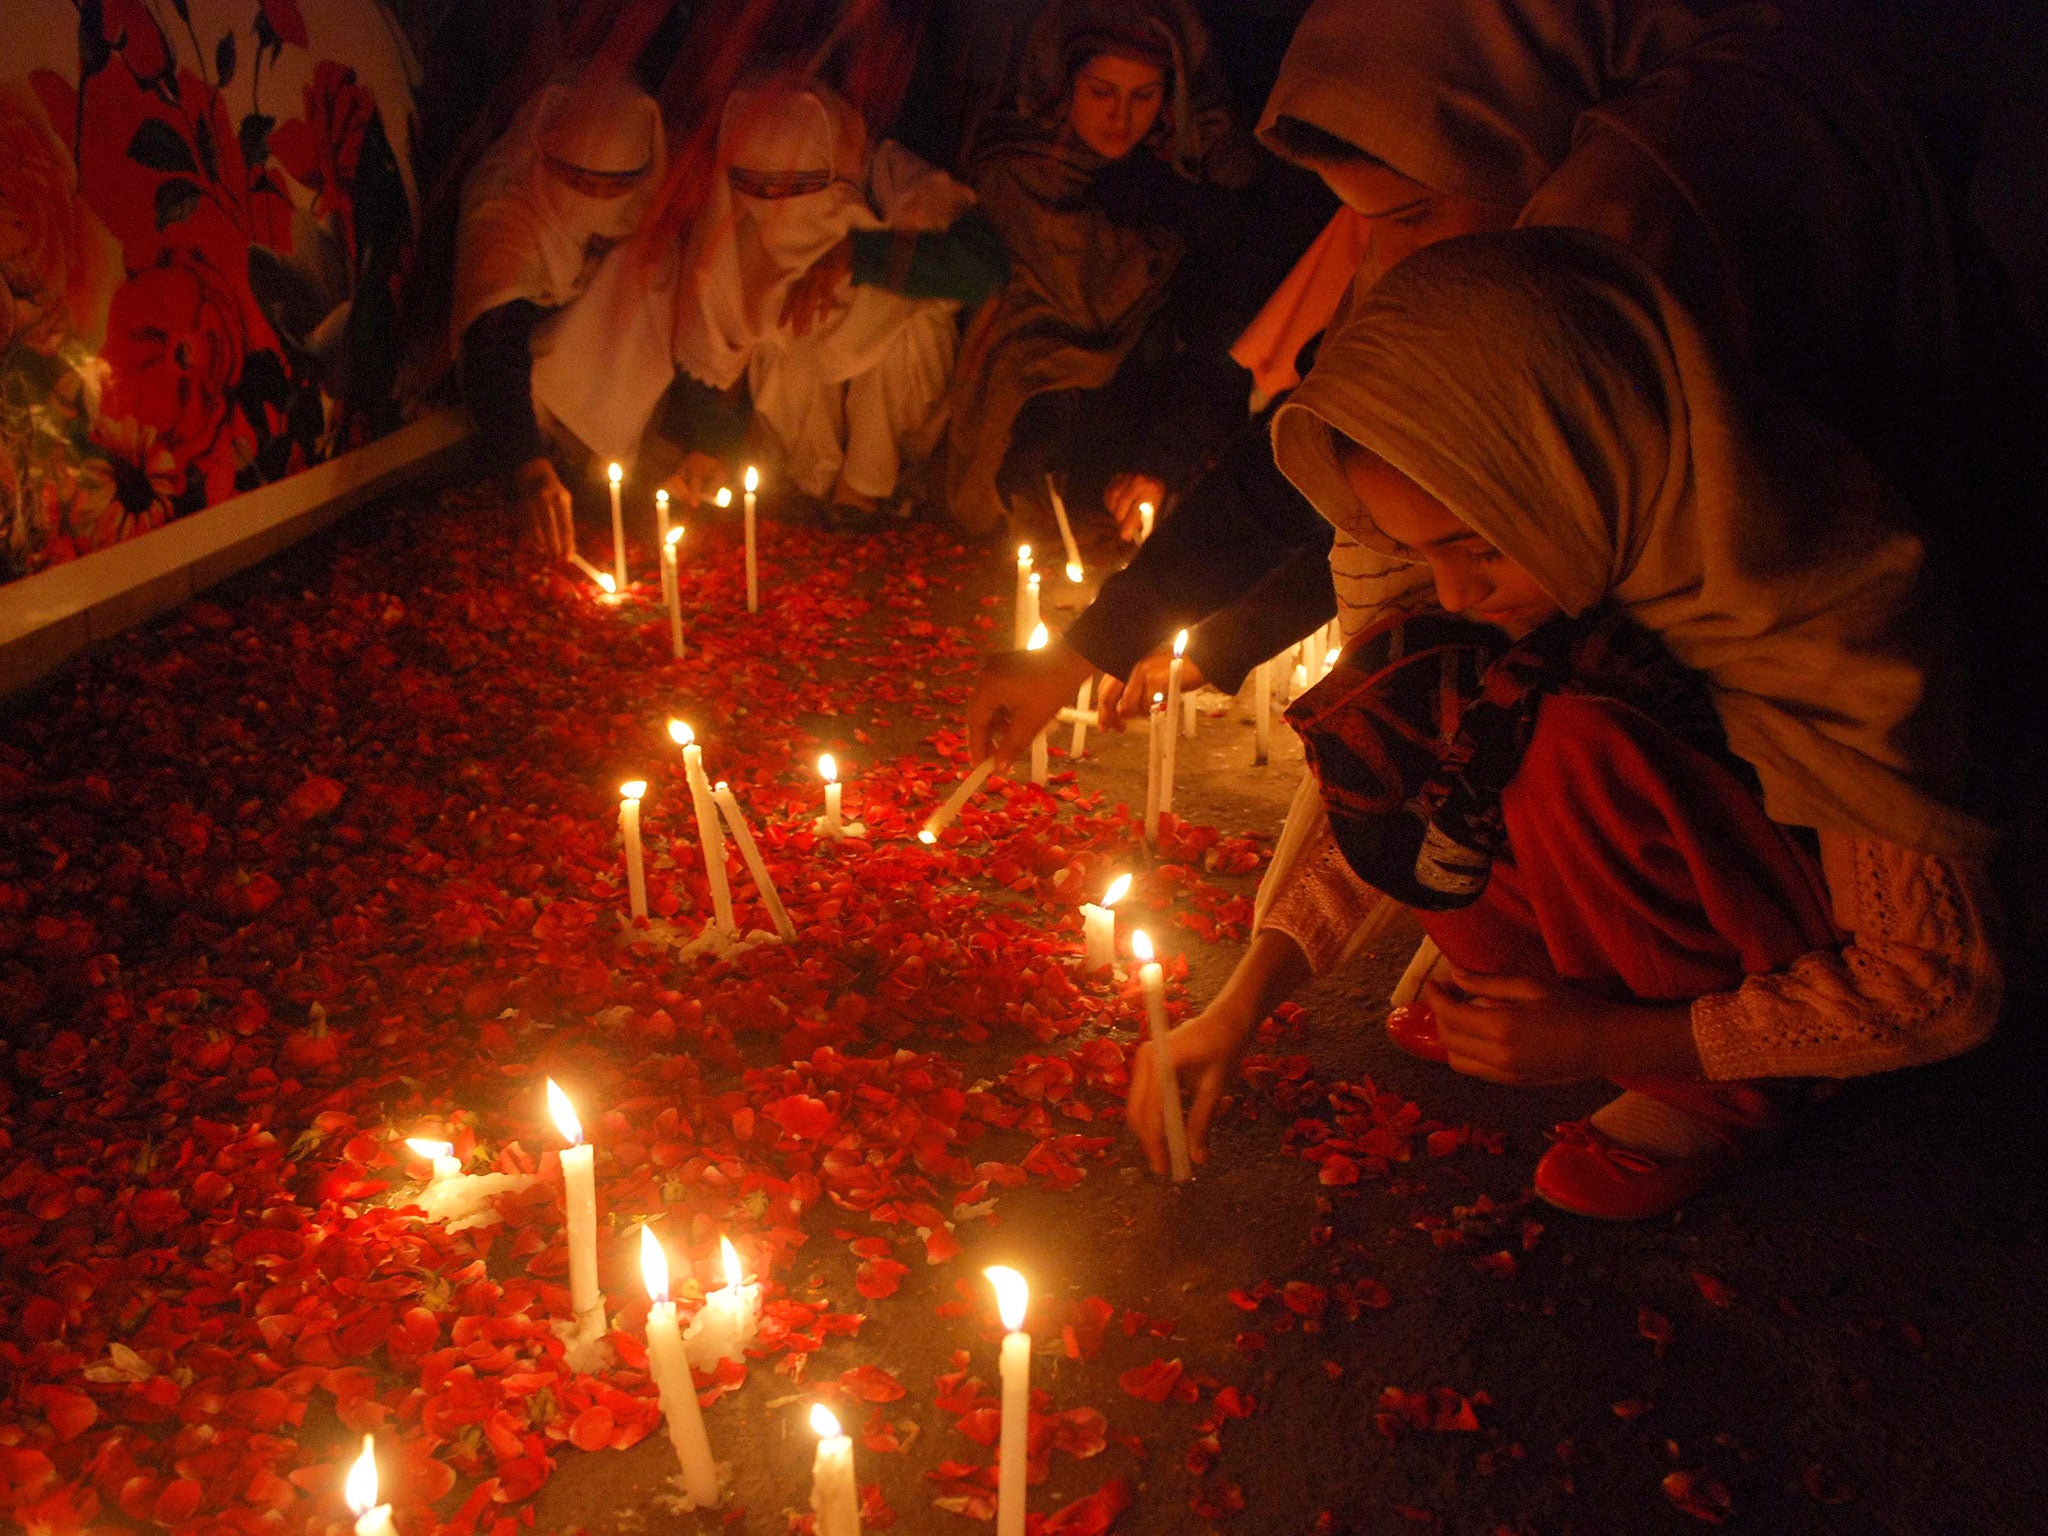 People light candles in memory of victims